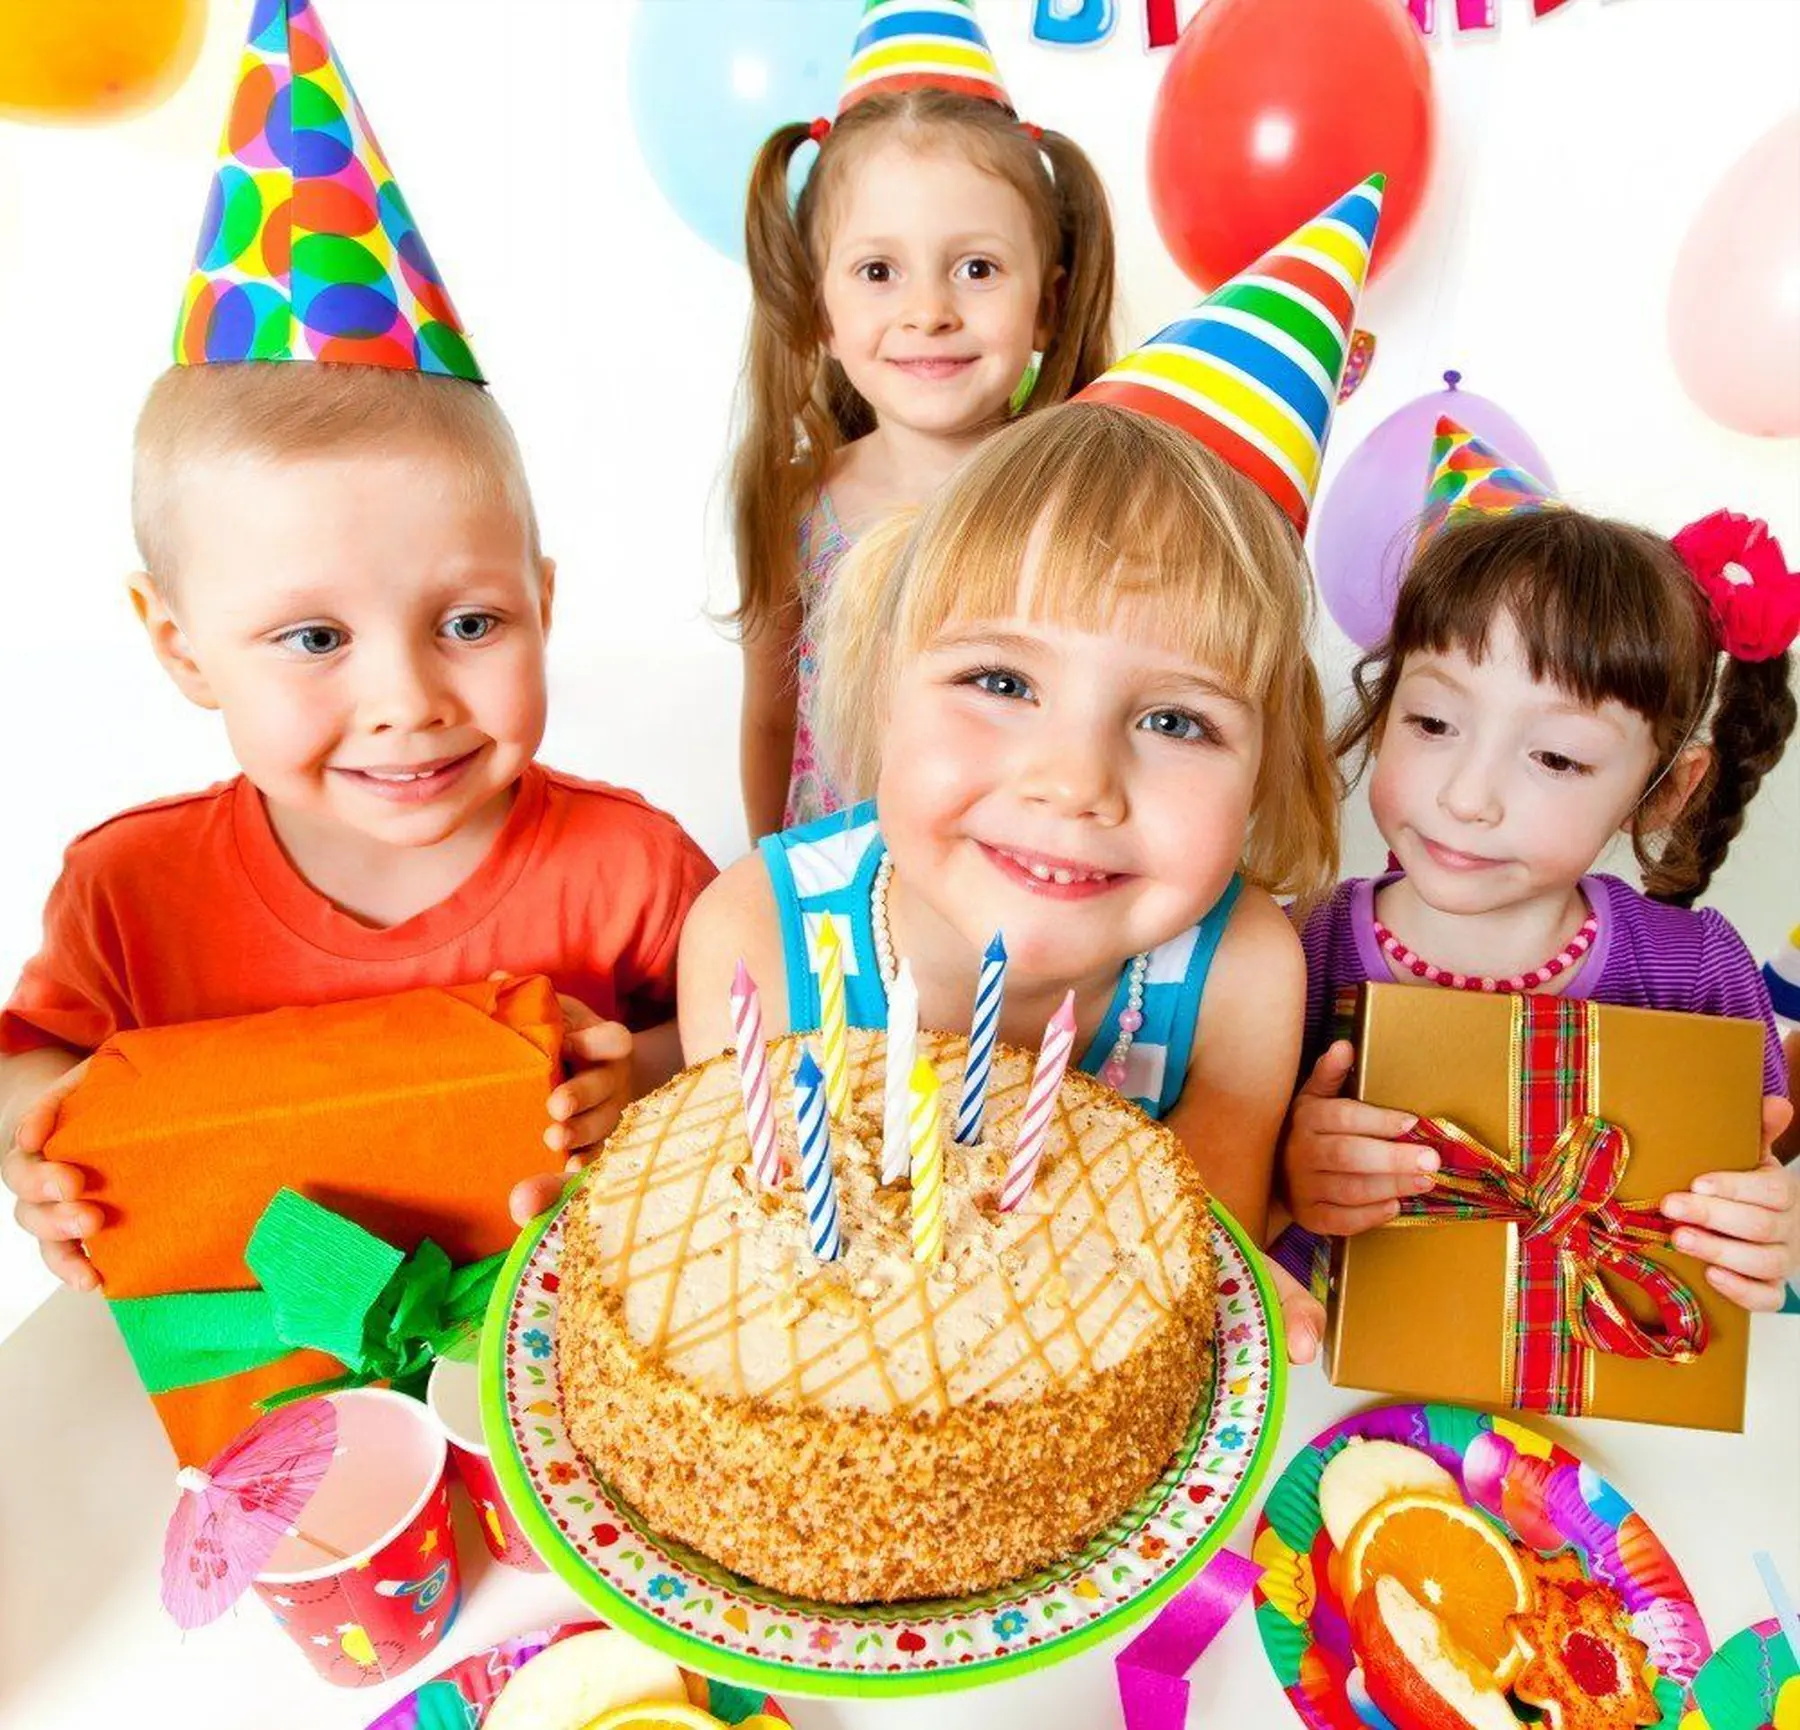 Children's birthday celebrations in the Trampoline Trier XXXL indoor amusement park for the whole family!